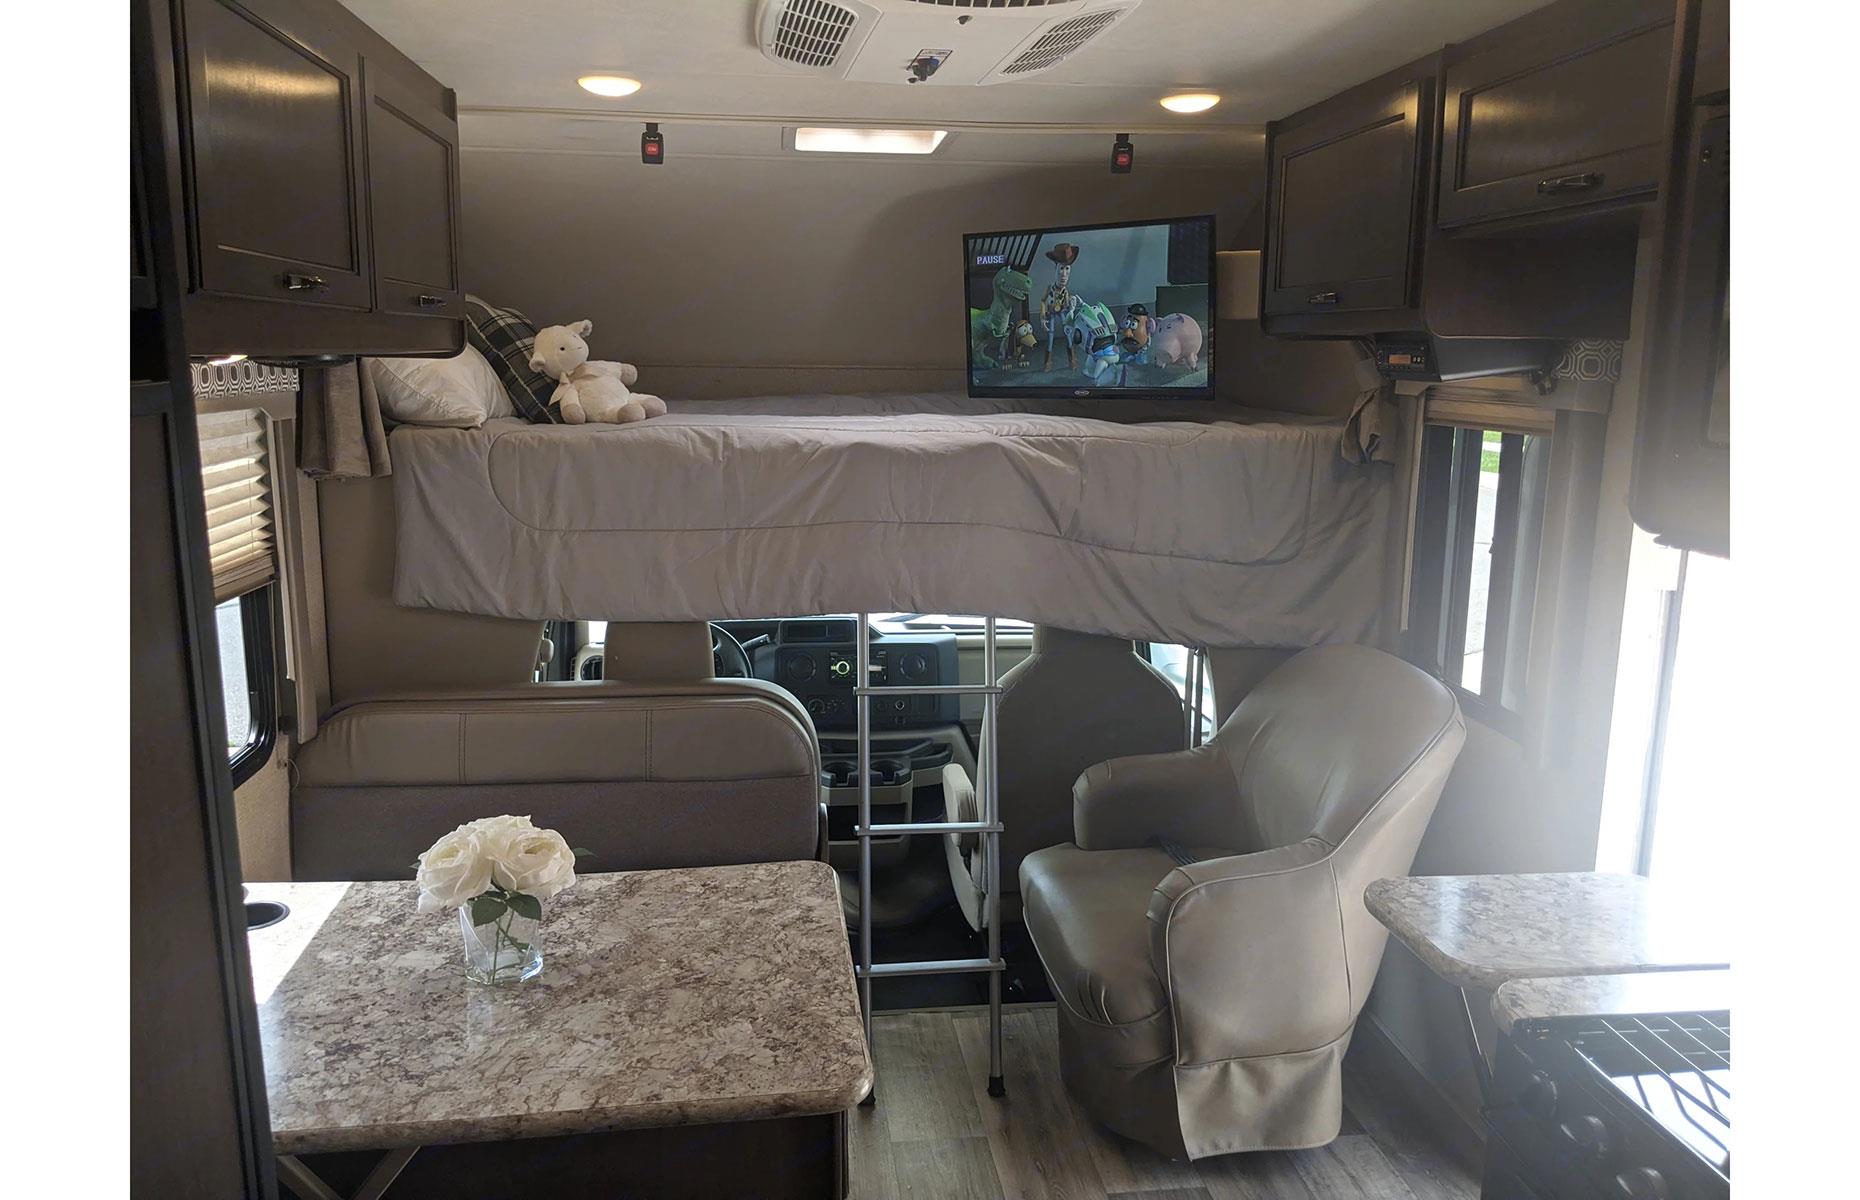 Two of the three beds can be found towards the front of the motorhome, including the sofa bed and dinette that double up as the living and dining areas. An over-cab bed sits above the driver’s seat (ideal for kids) with a flatscreen TV in the corner for easy access. Directly next to the kitchen is the double bed with a privacy curtain and next to that the bathroom with a toilet, sink and shower.